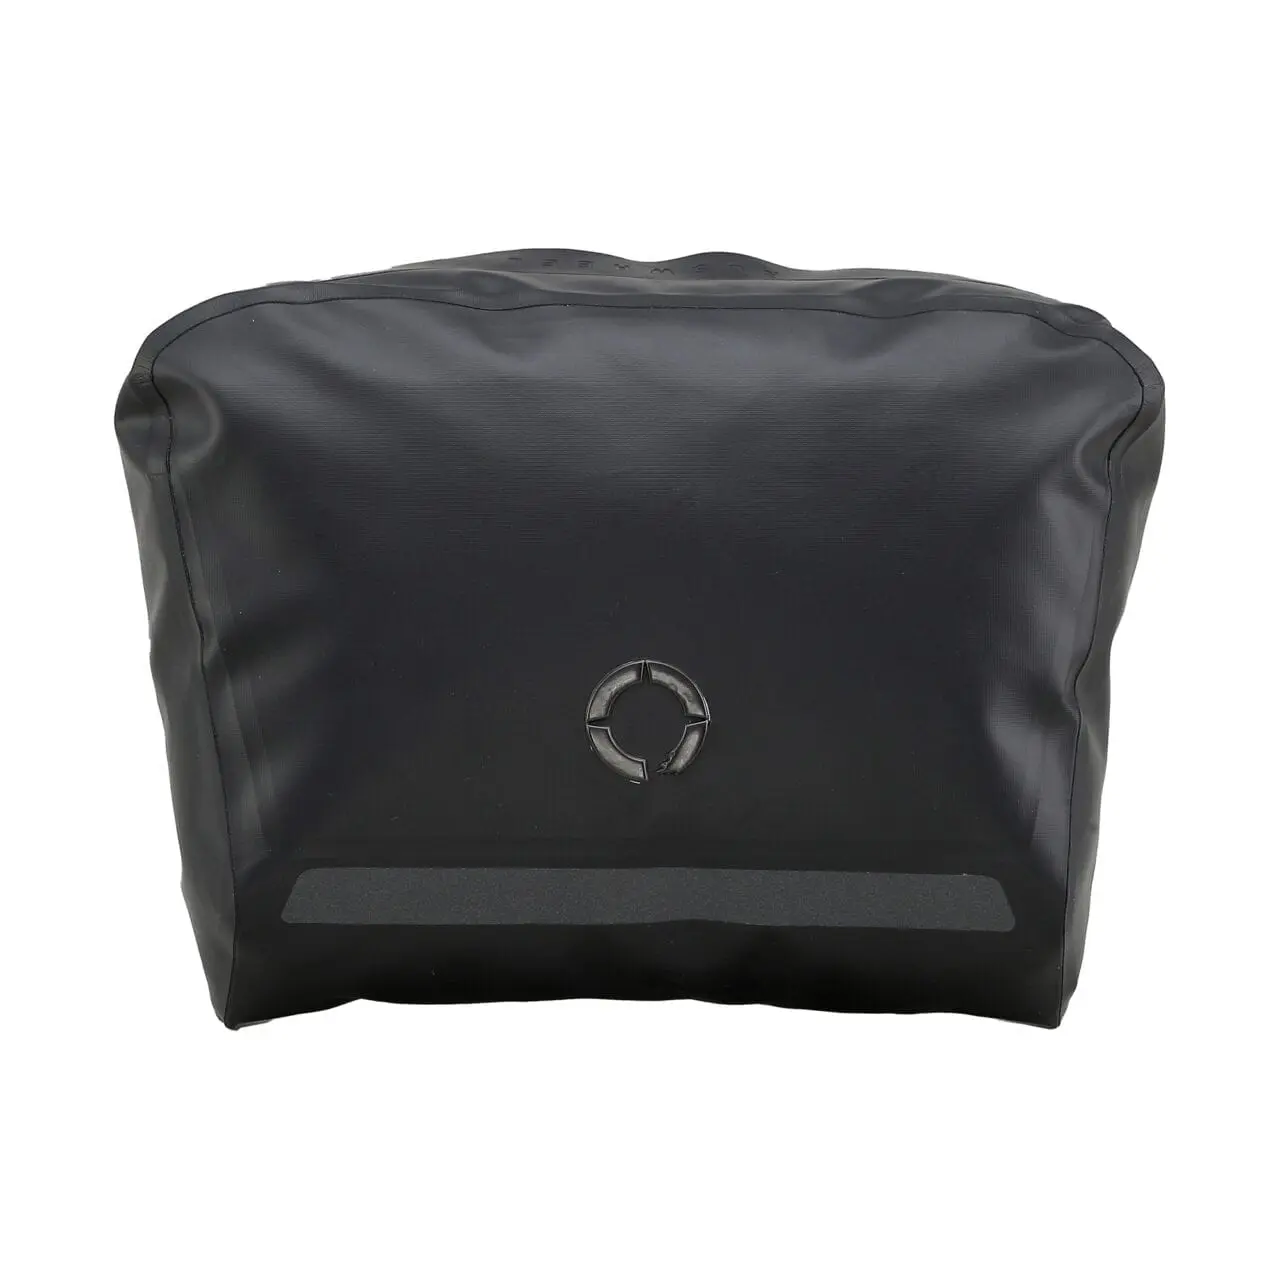 alt="Roswheel Road Accessory Pouch"